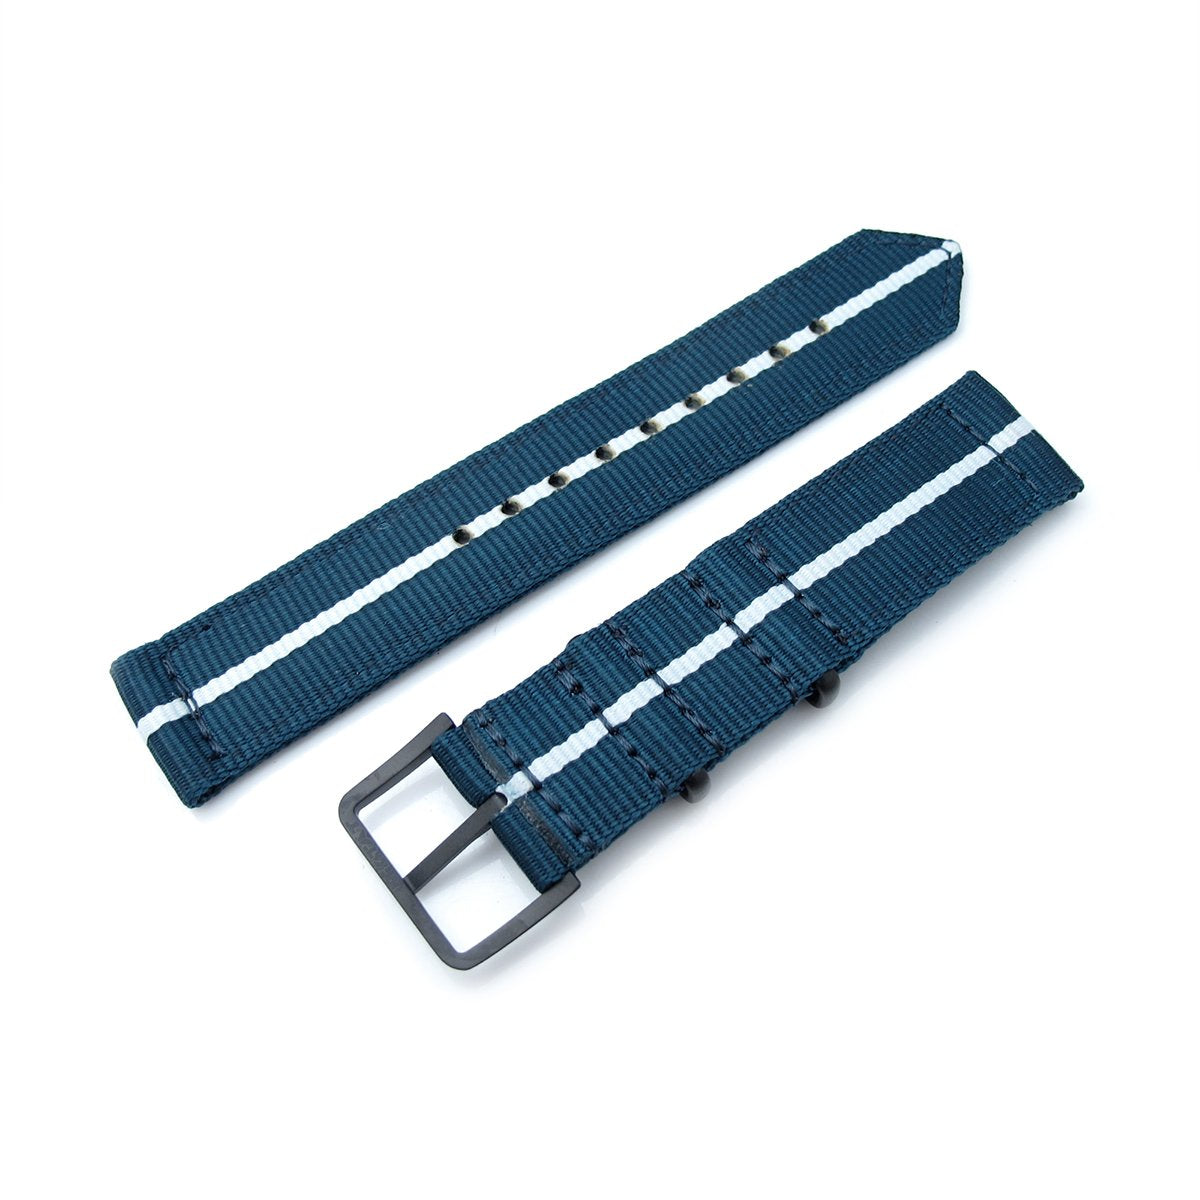 20mm Two Piece WW2 G10 Nylon Navy Blue & White PVD Buckle Strapcode Watch Bands